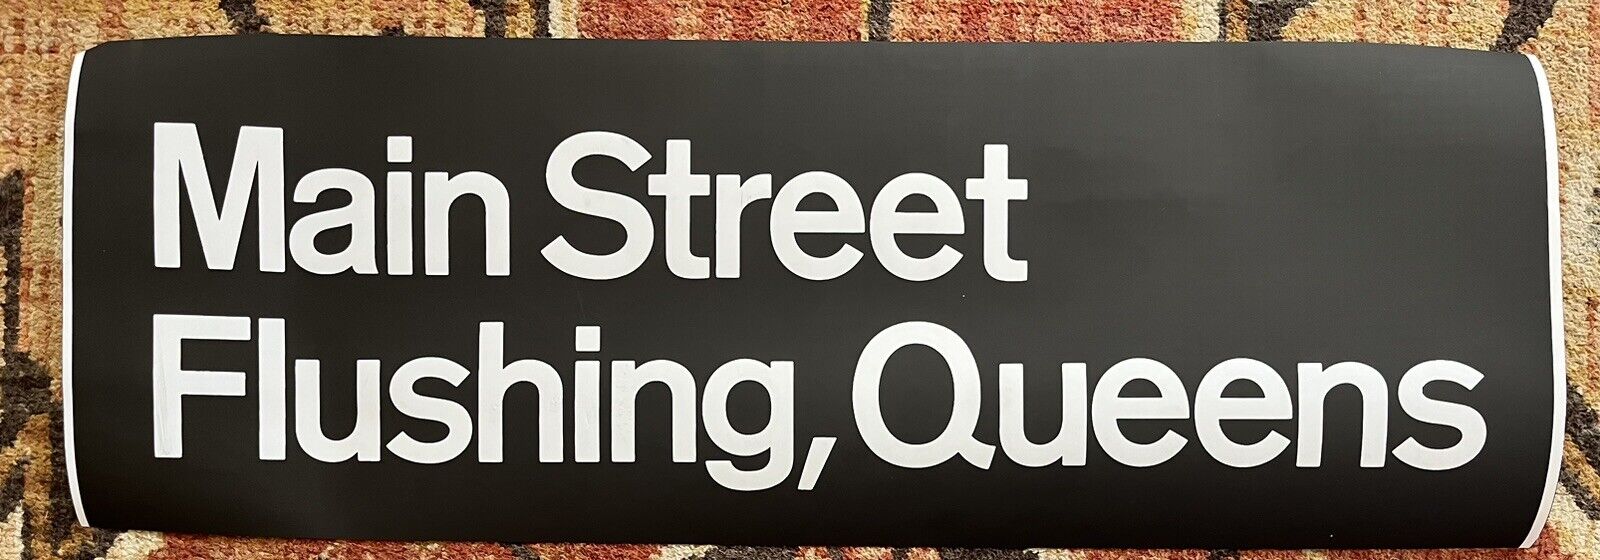 NYC SUBWAY VINTAGE ROLL SIGN MAIN STREET FLUSHING QUEENS ROOSEVELT AVENUE